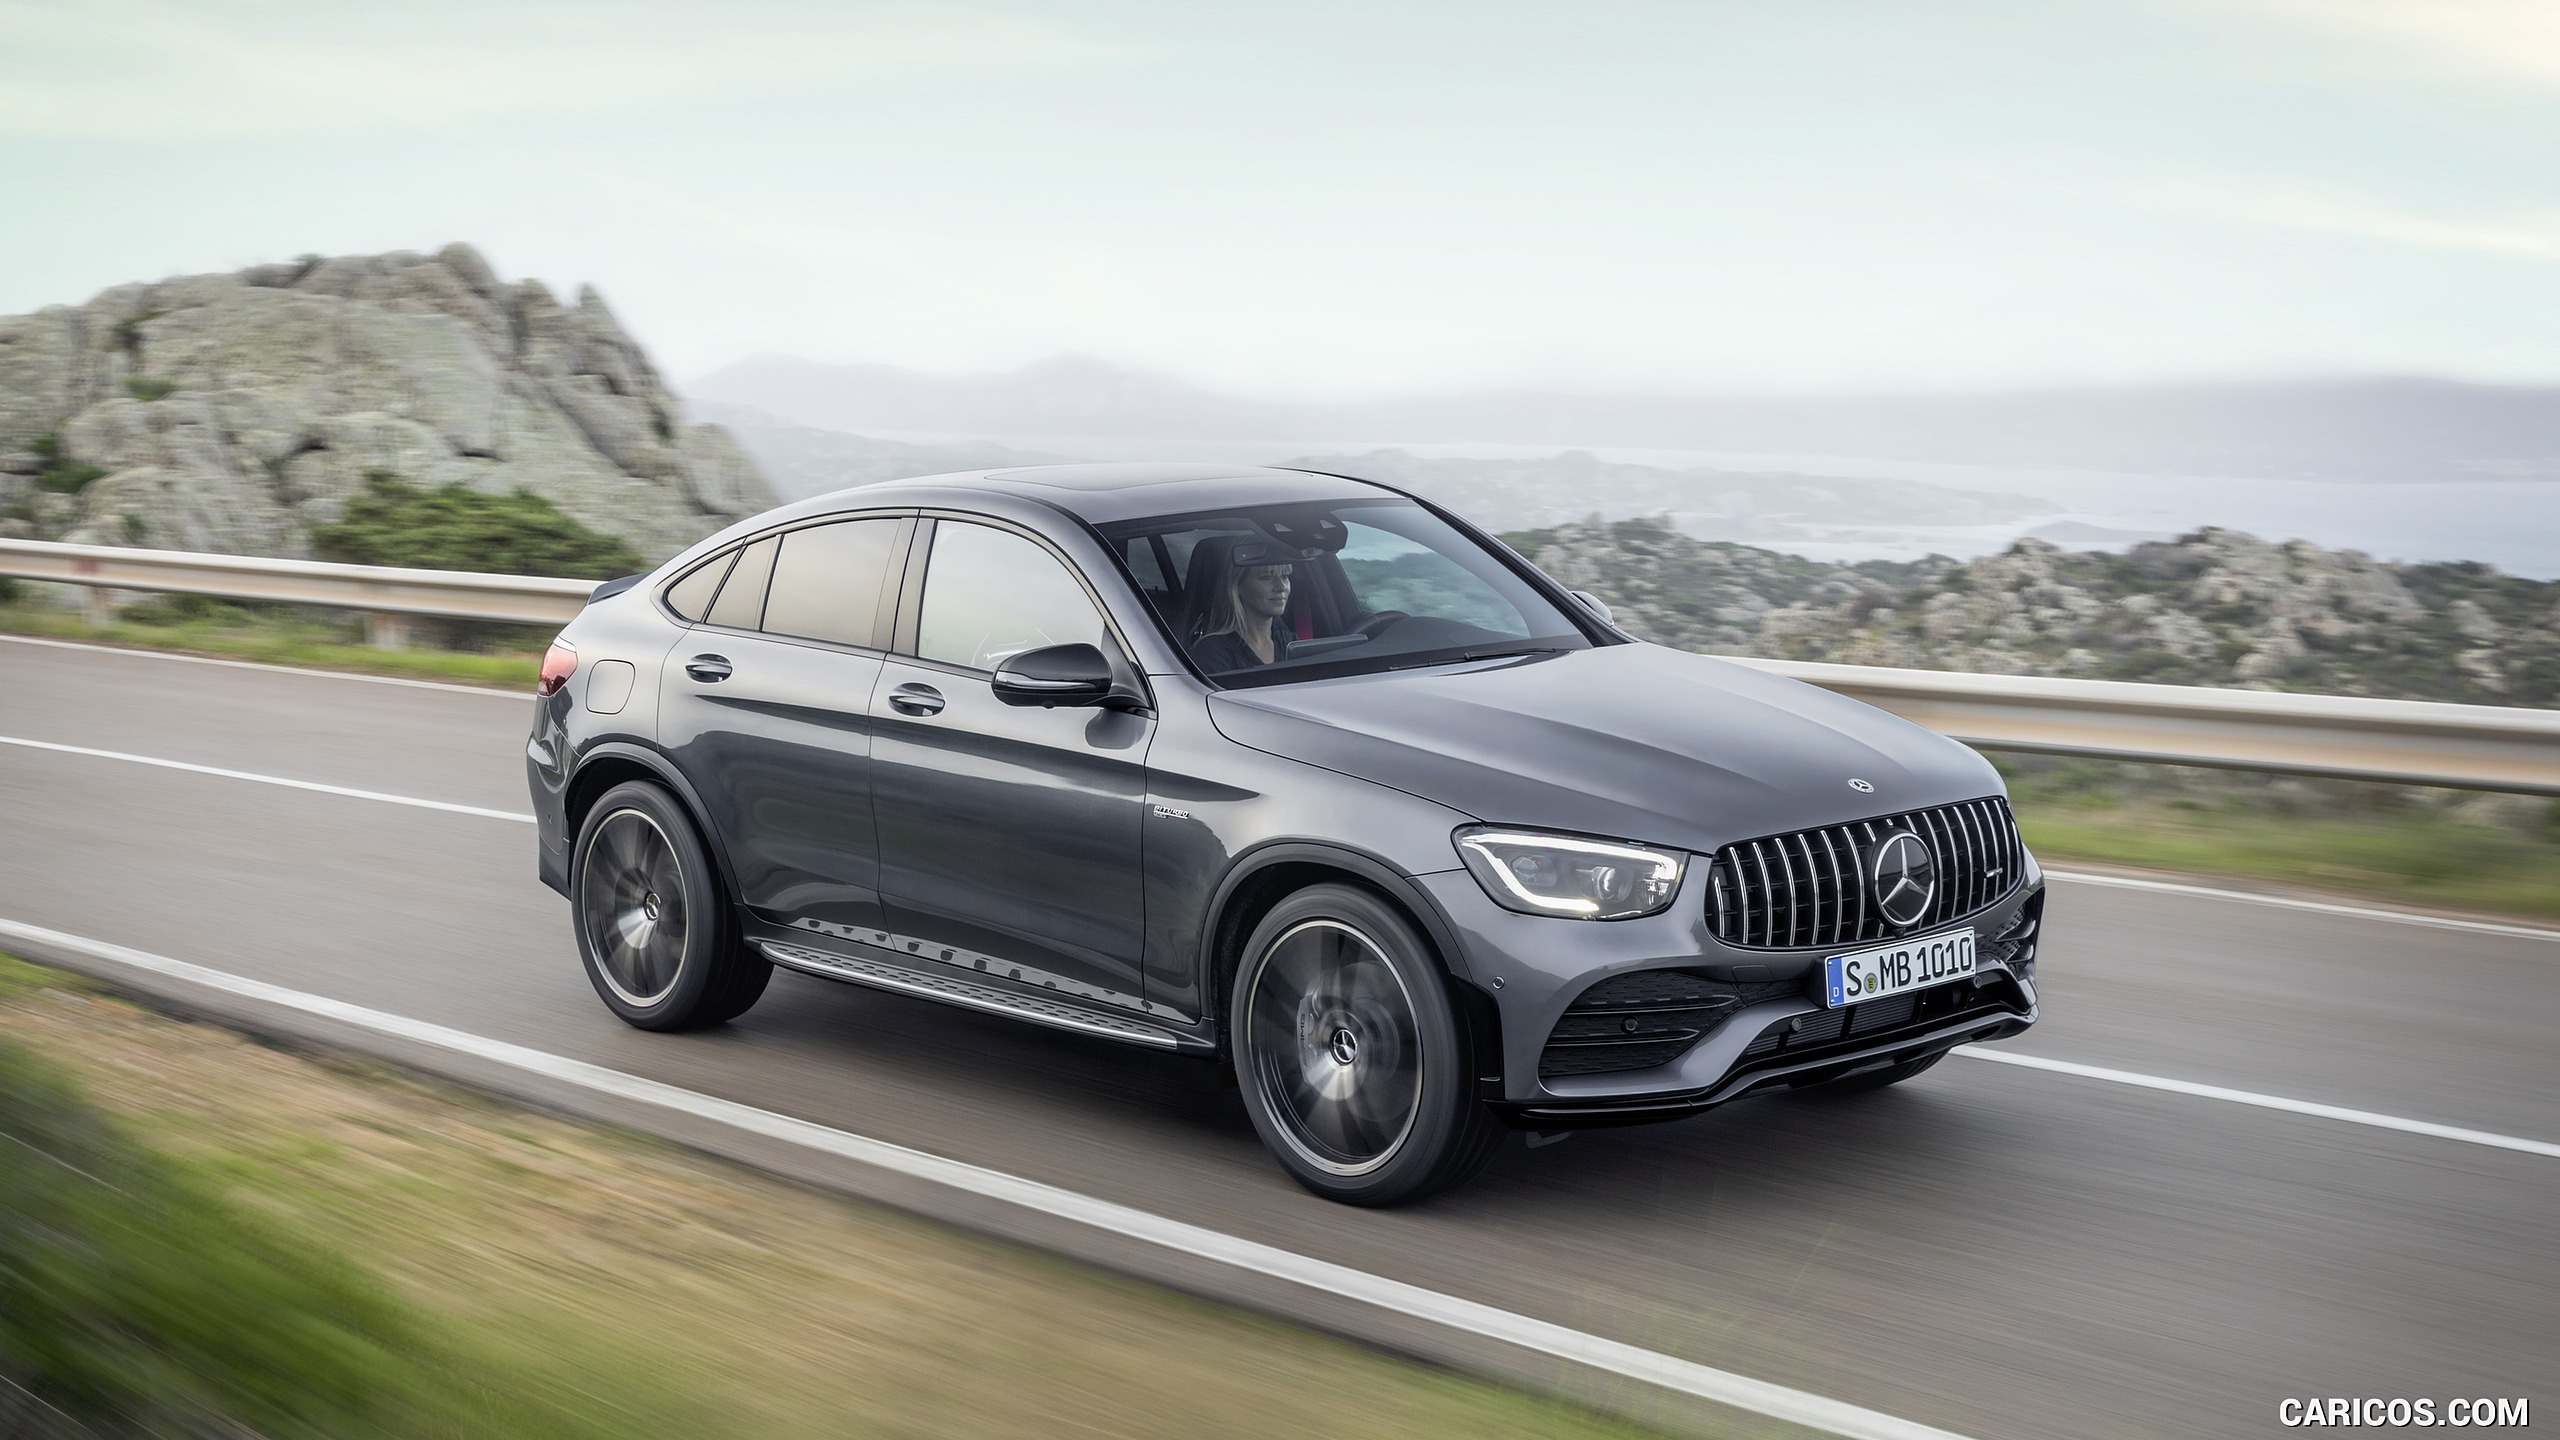 2020 Mercedes-AMG GLC 43 4MATIC Coupe - Front Three-Quarter, #4 of 173